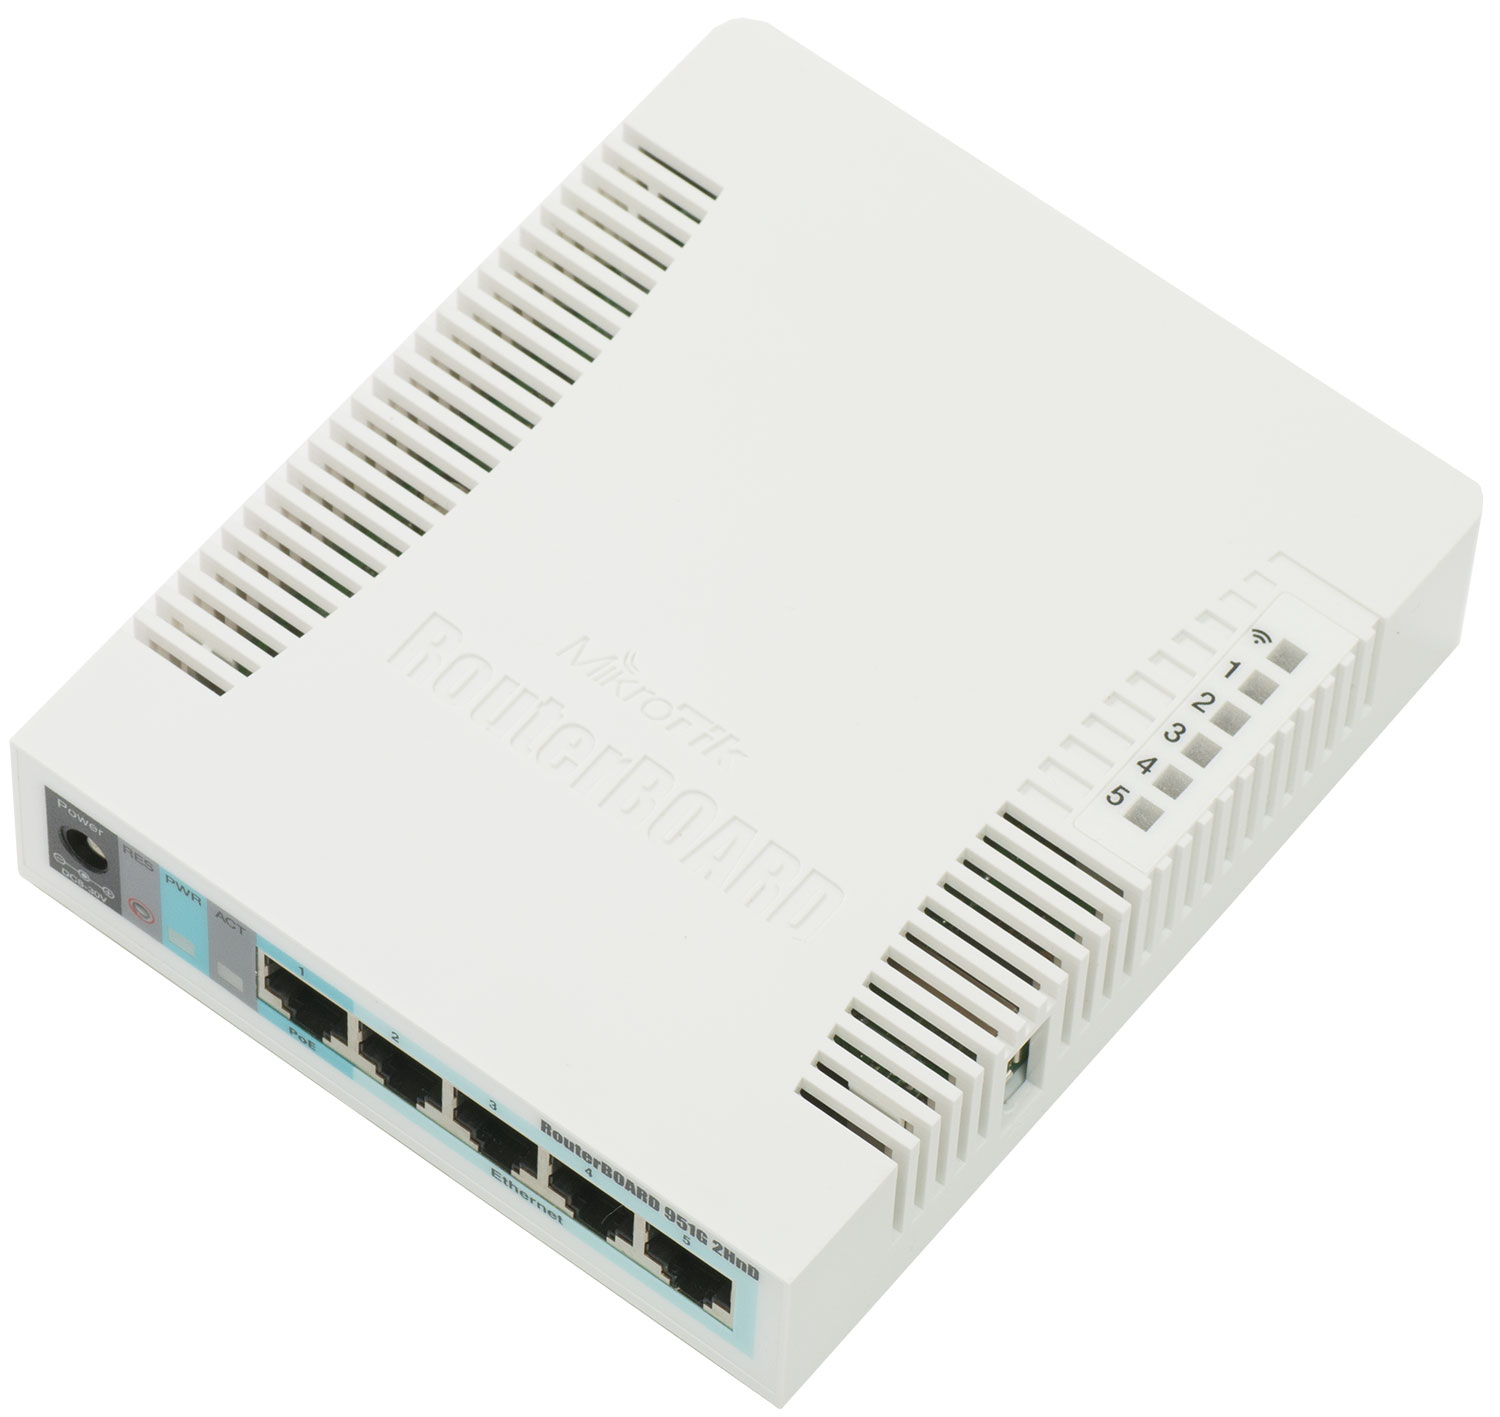 SG :: MikroTik RB951G-2HnD Wireless Router